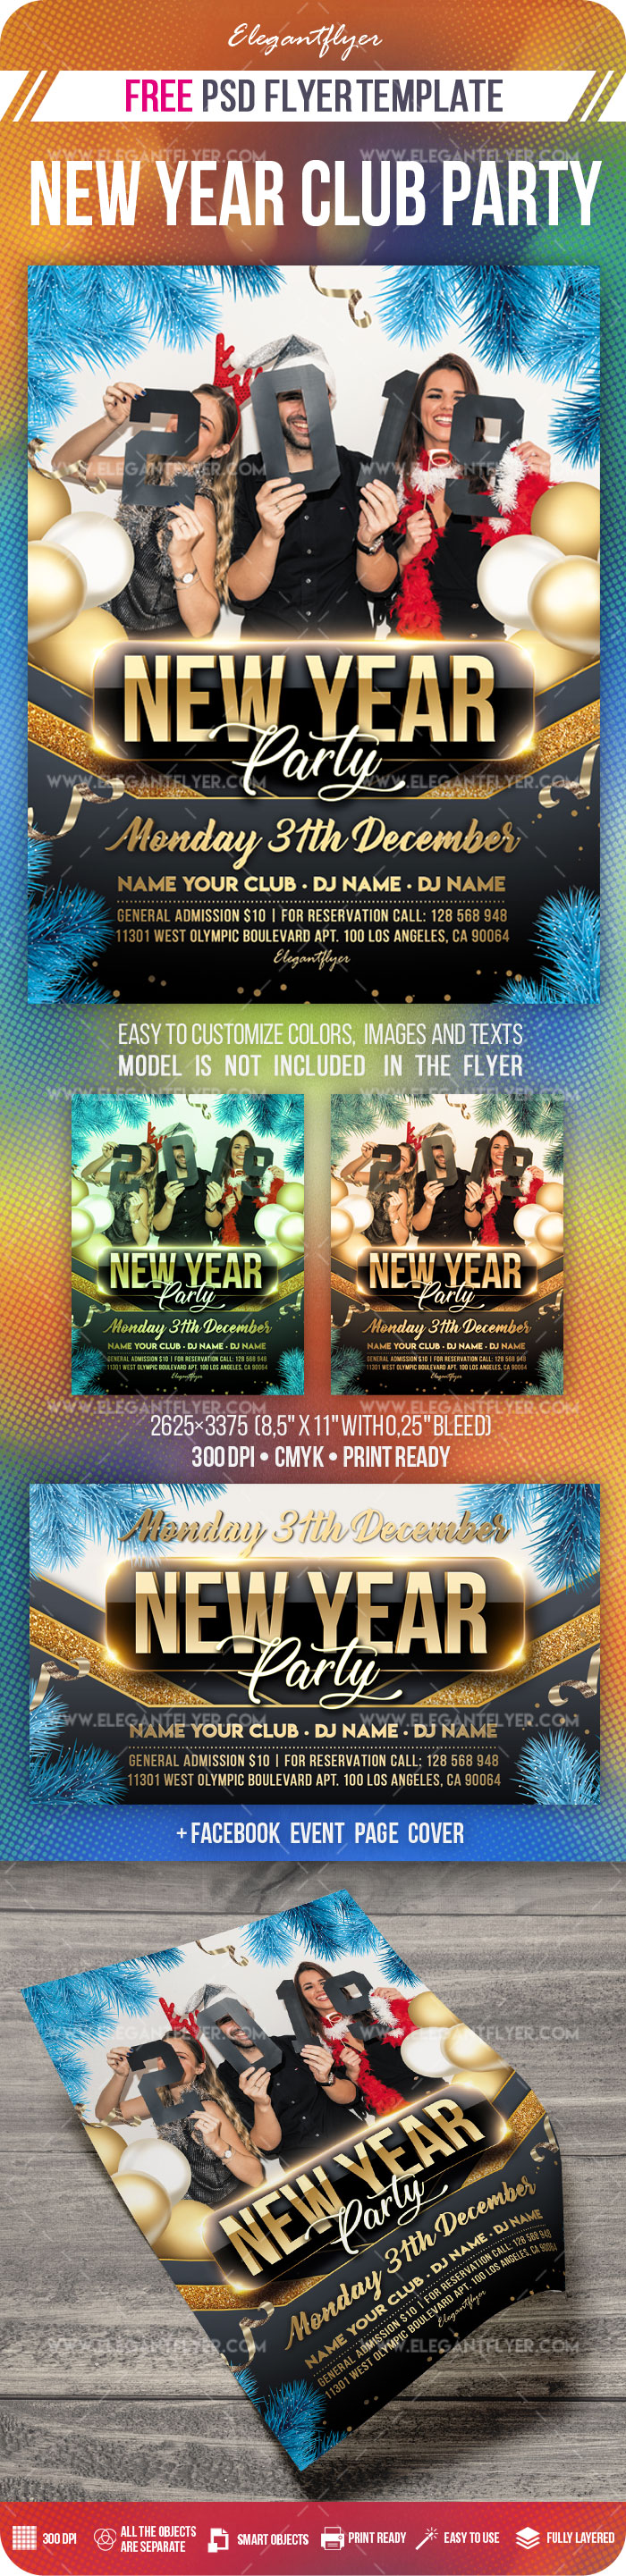 New Year Party Free Flyer PSD Mockup